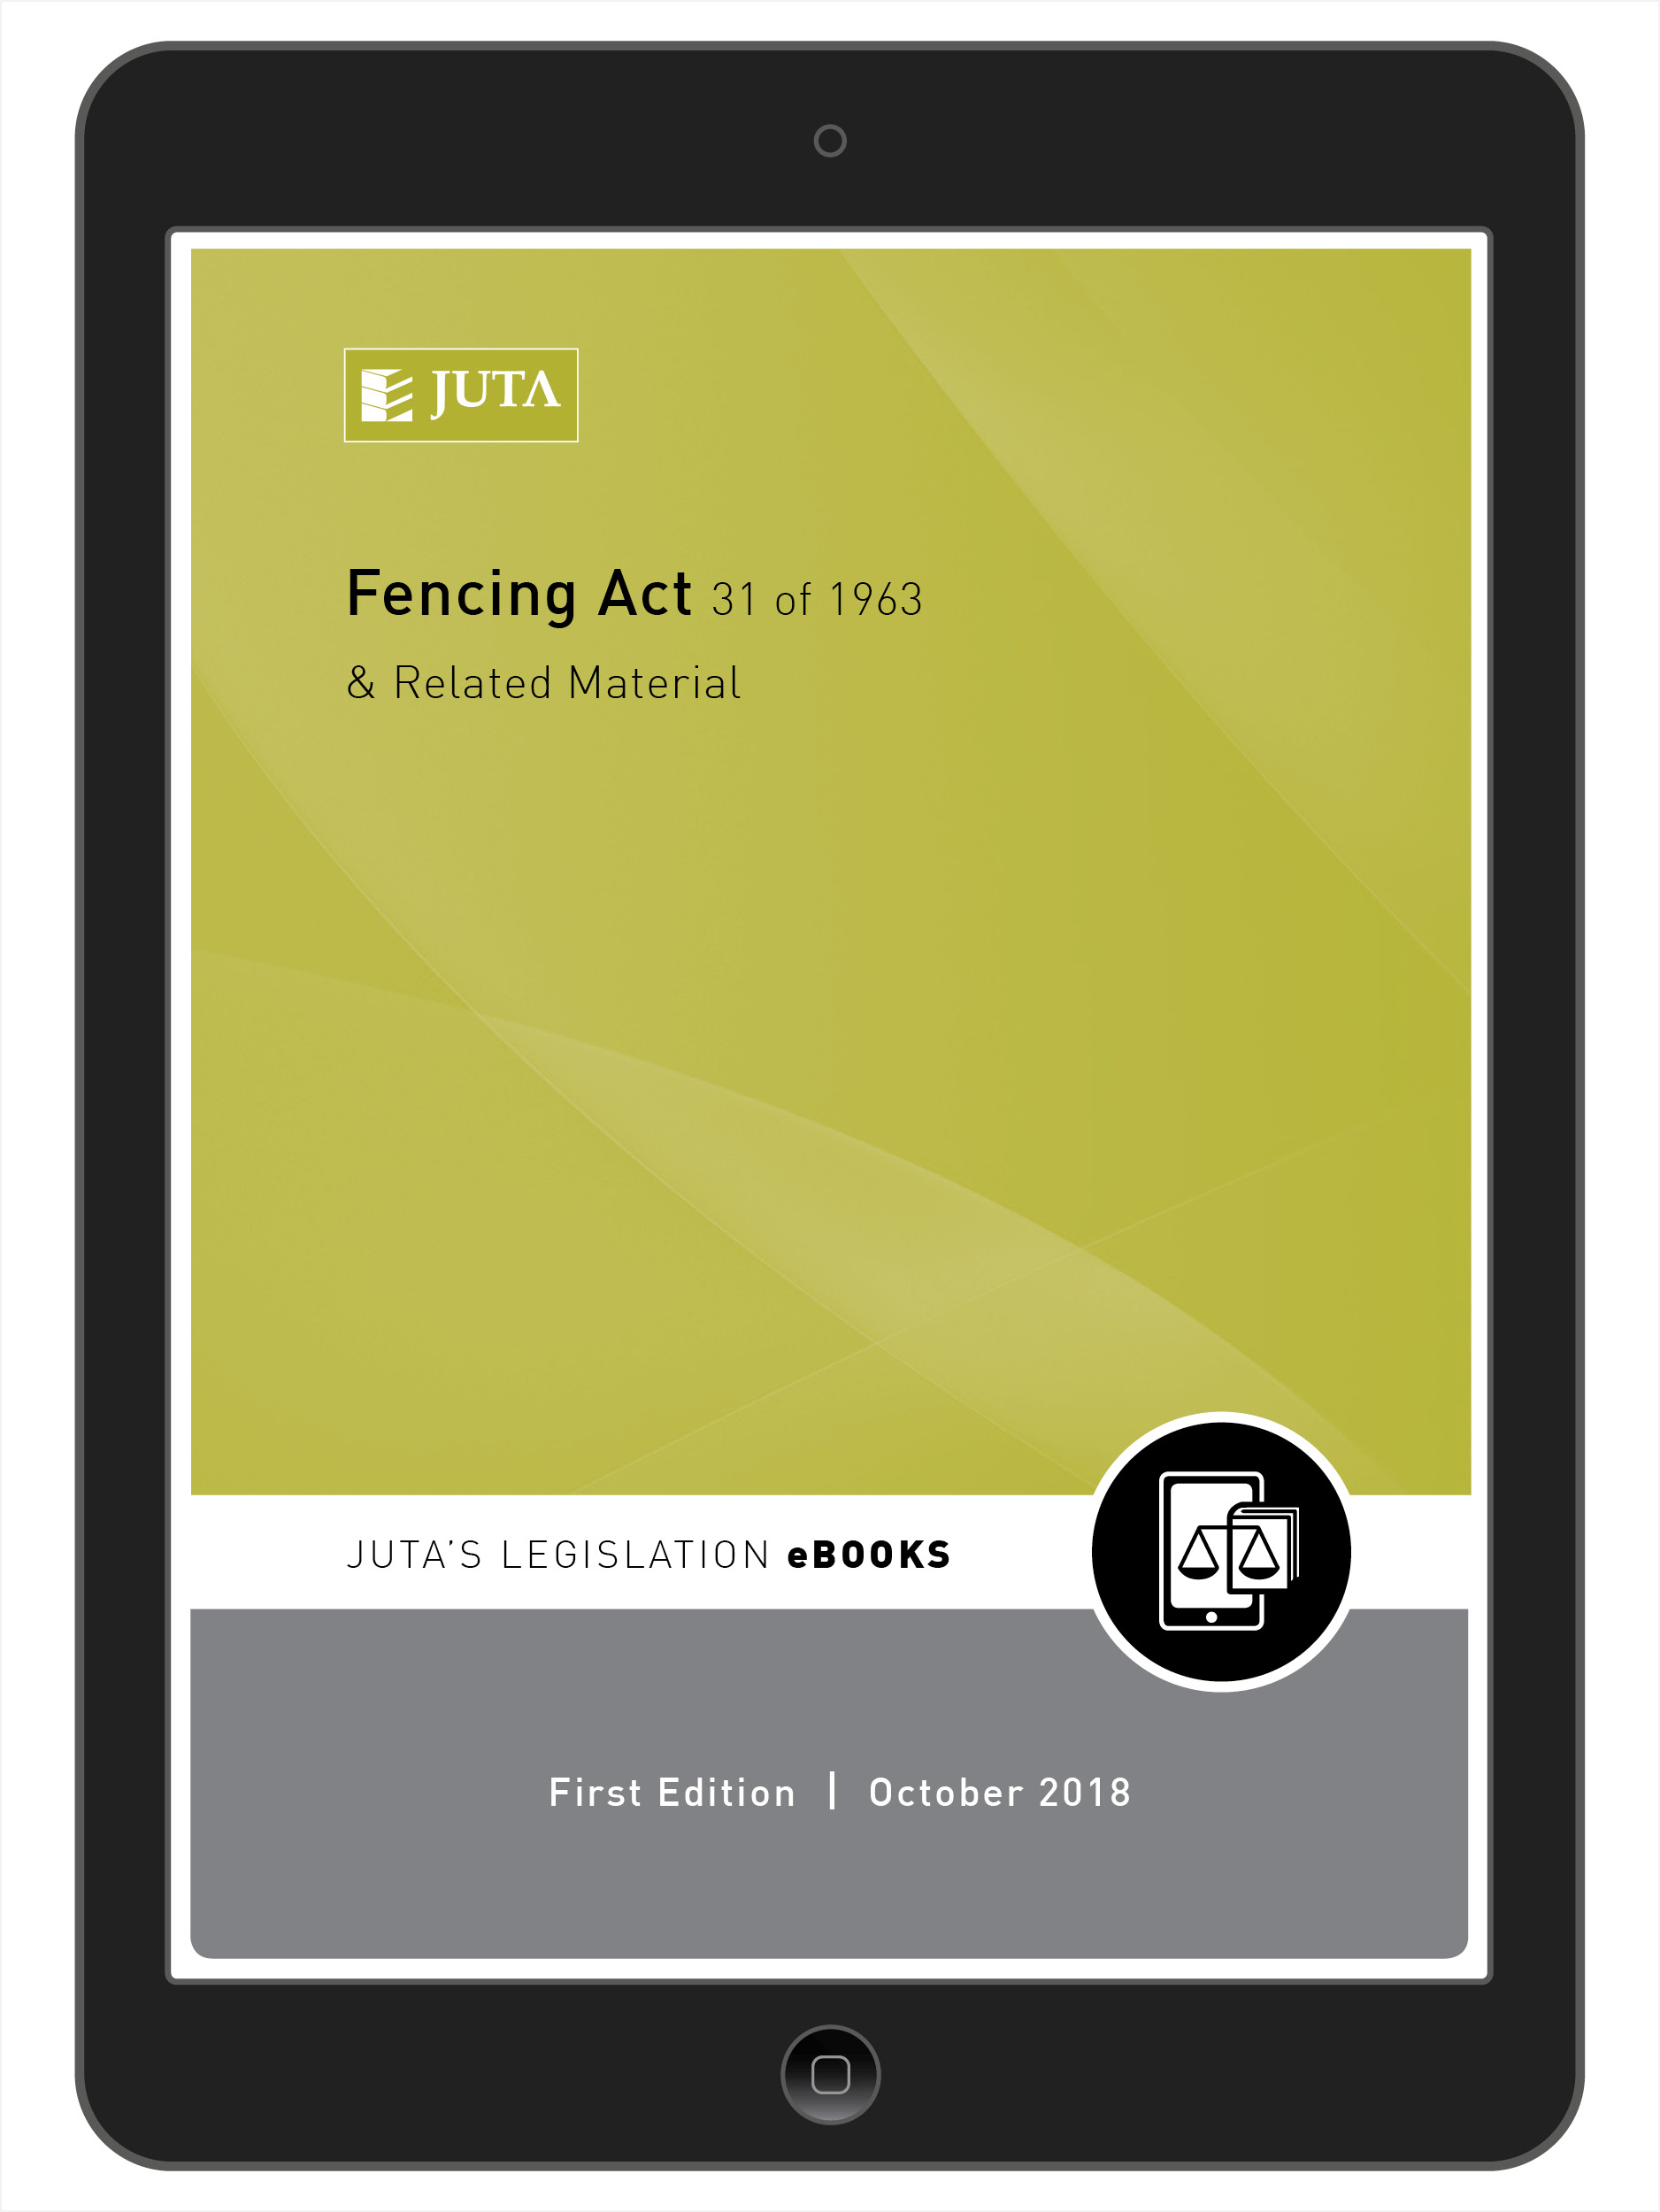 Fencing Act 31 of 1963 & Related Material